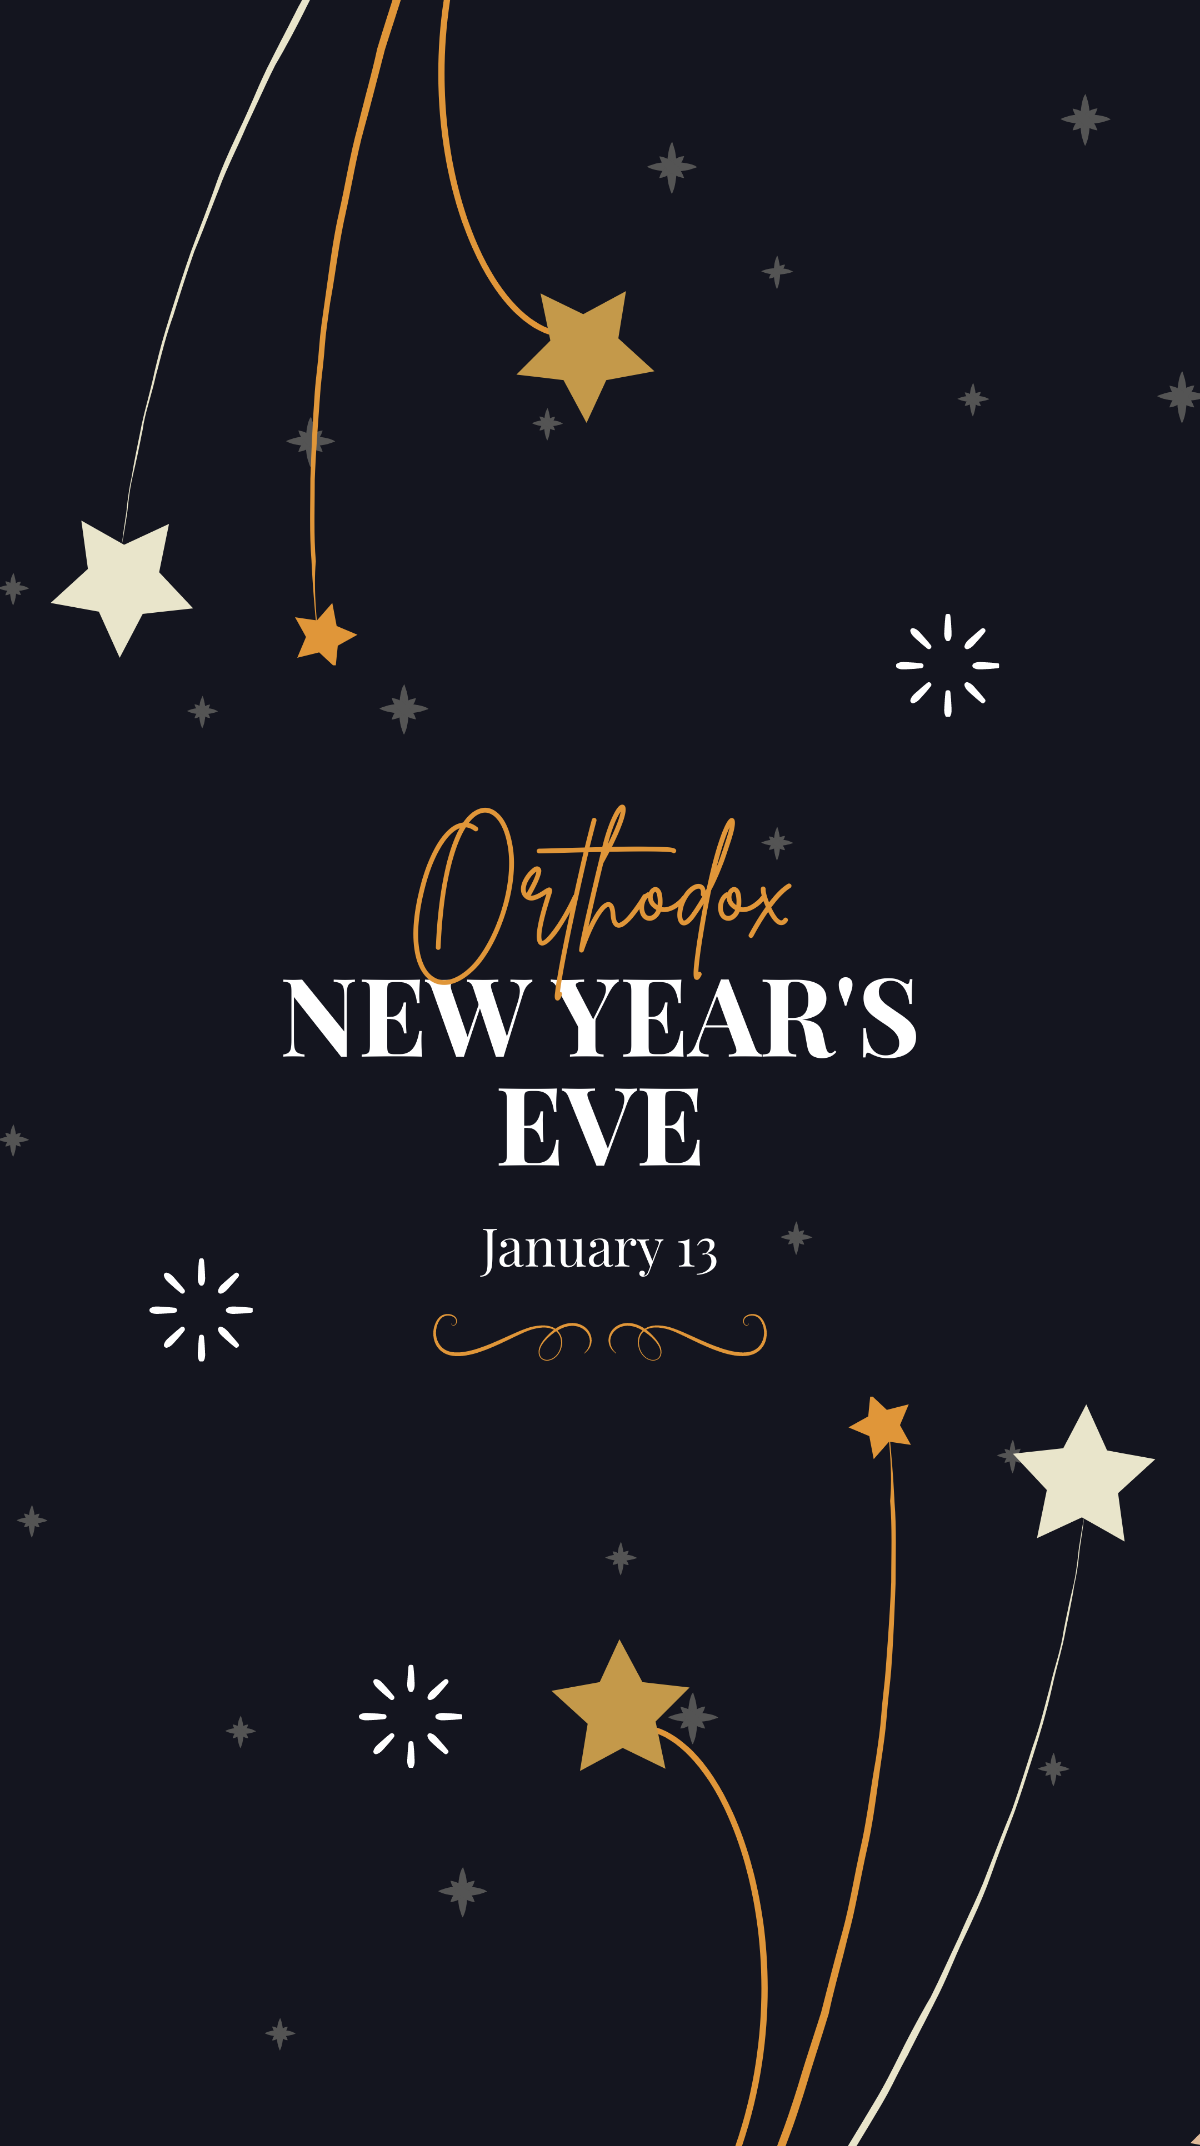 Free Orthodox New Year Eve Instagram Story Template